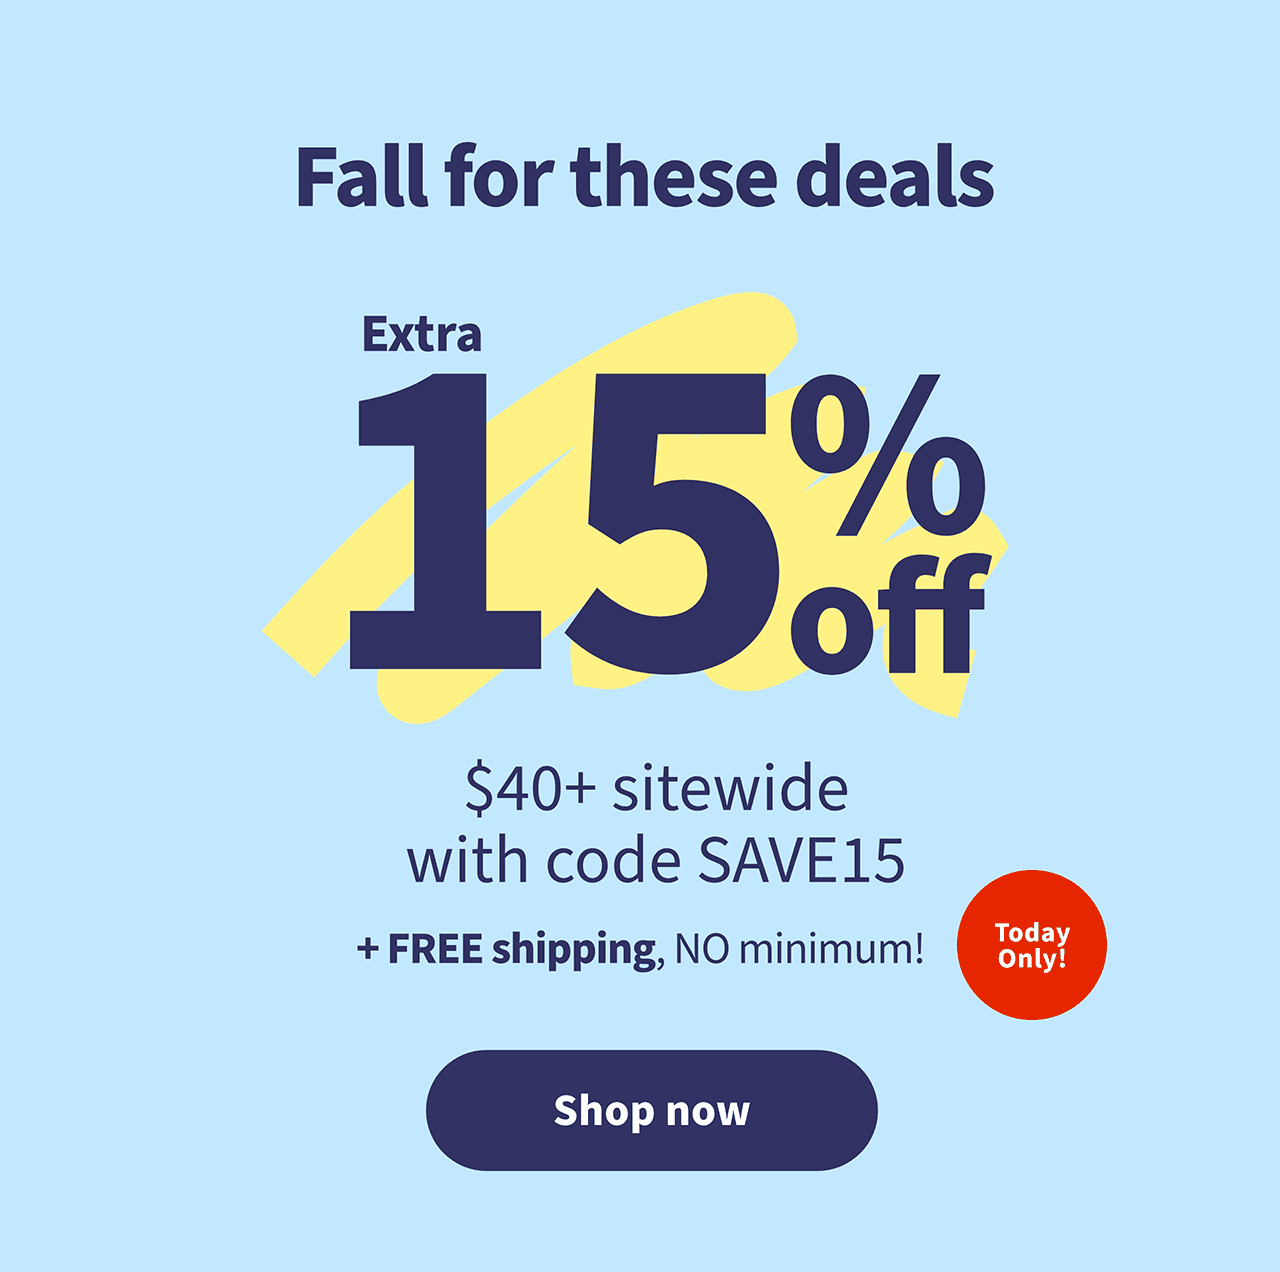 Fall for these deals. Extra 15% off $40+ sitewide with code SAVE15 +FREE shipping, NO minimum! Today Only! Shop now.